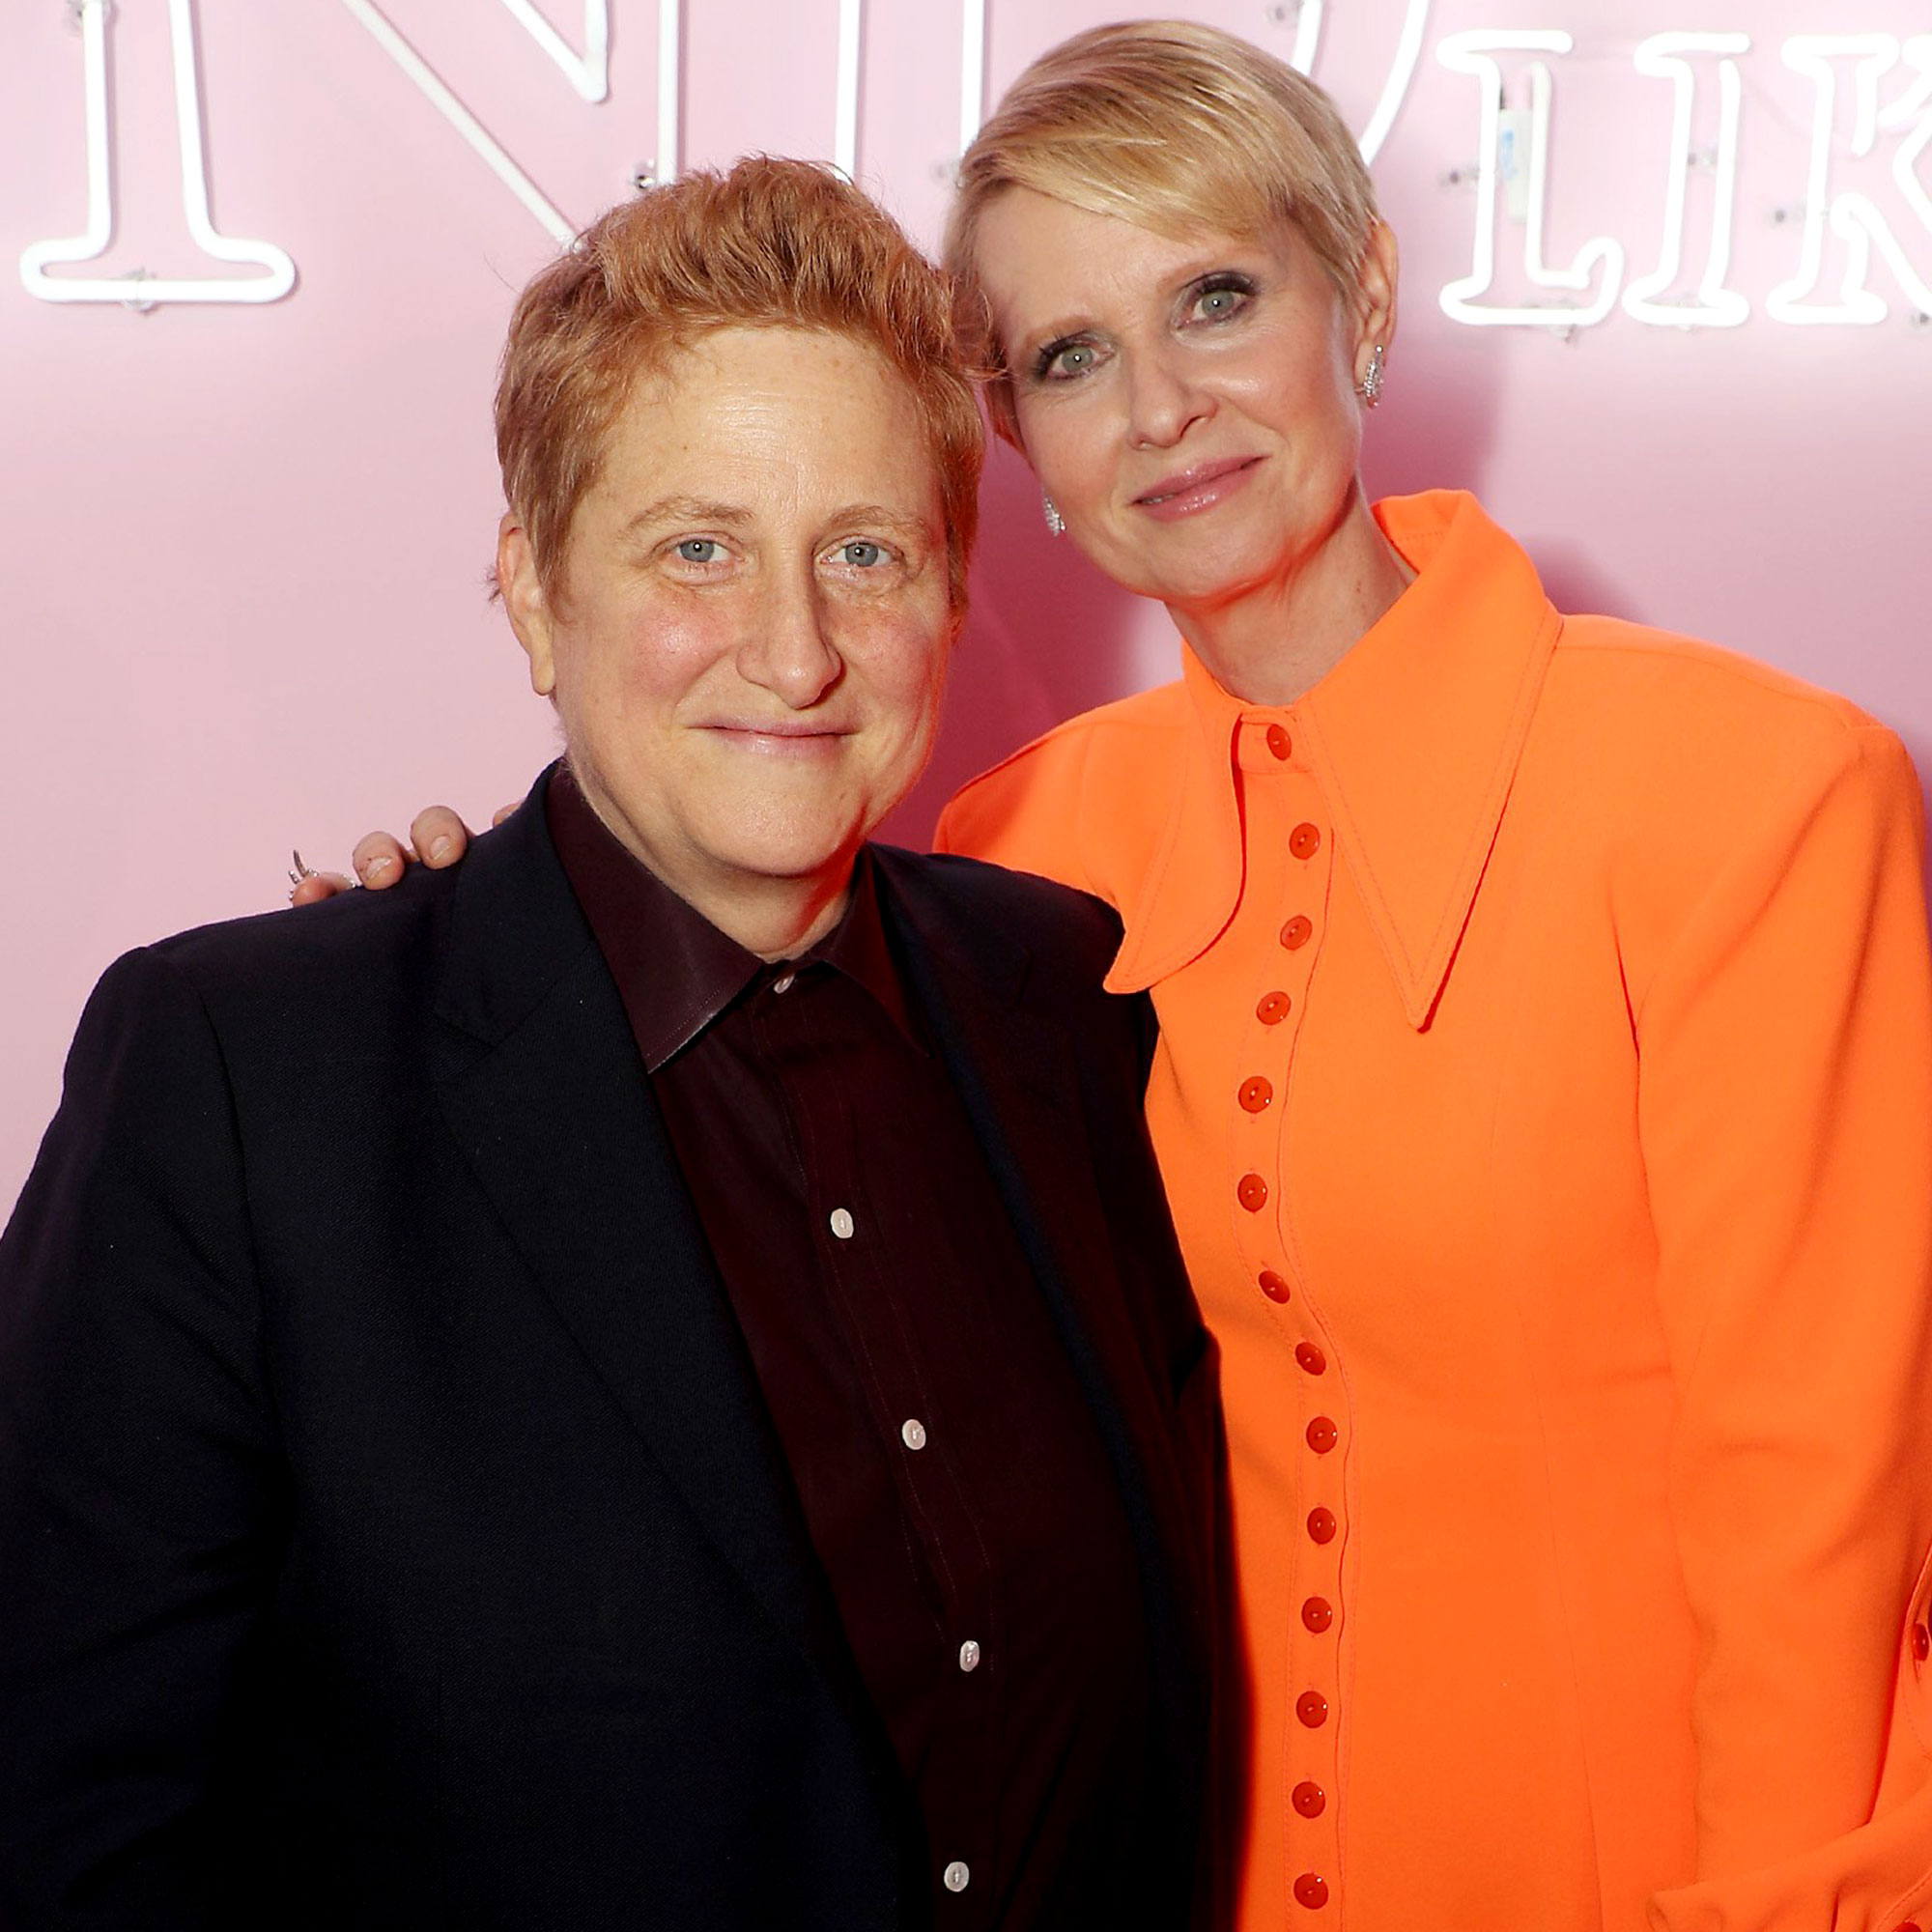 Cynthia Nixon Reveals What Her Wife Thinks of Her Sex Scenes photo pic